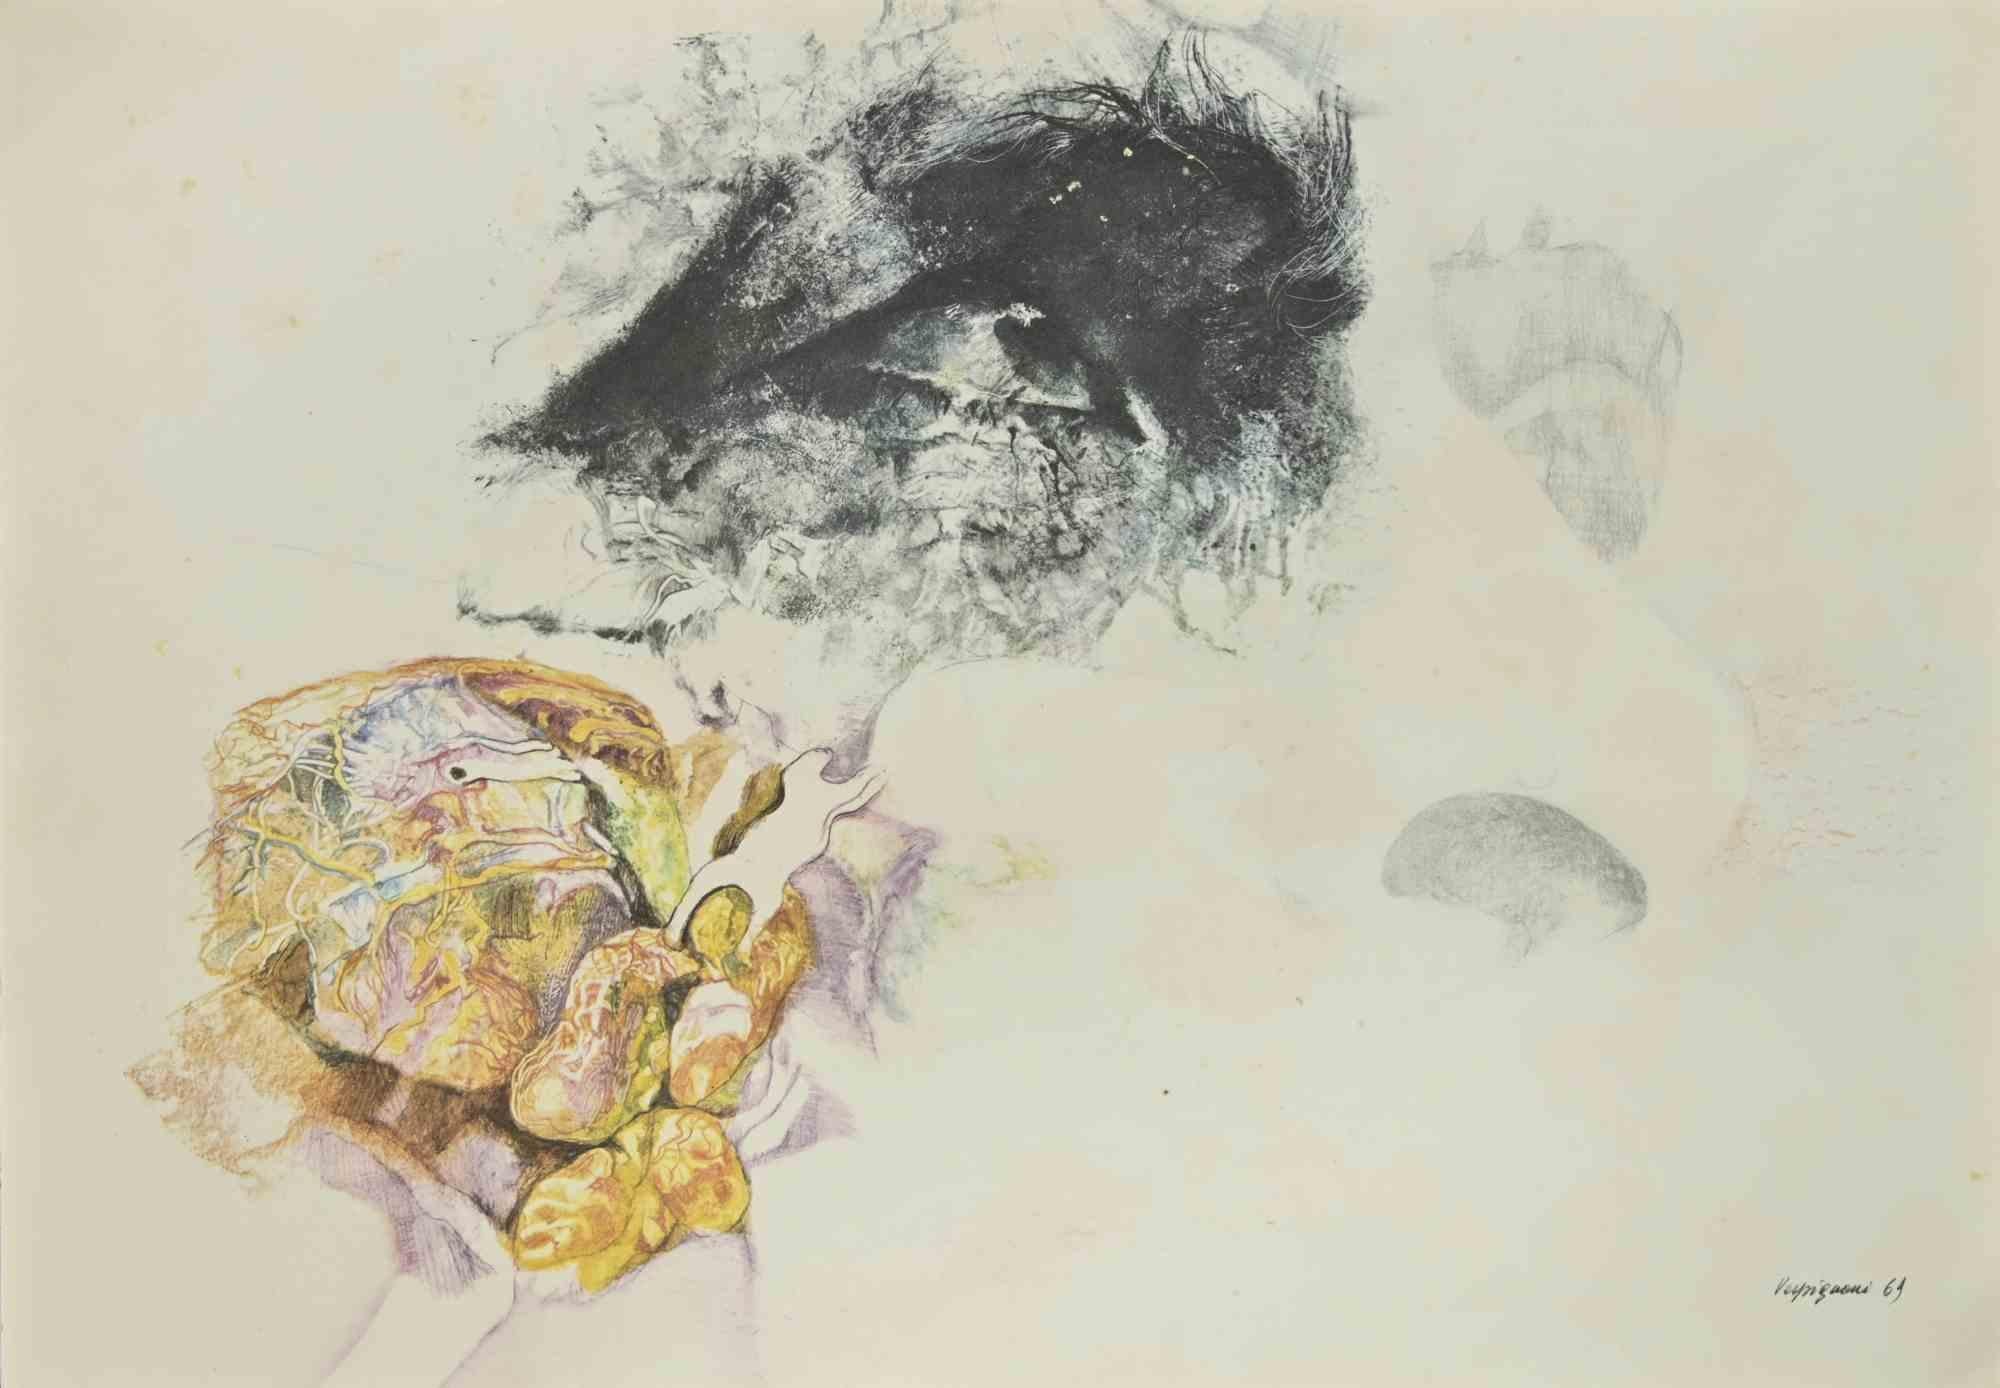 The Face is a phototype print reproducing drawing by Renzo Vespignani of the 1960s

Signed on the plate lower right.

The artwork is depicted through strong strokes and perfect hatchings.